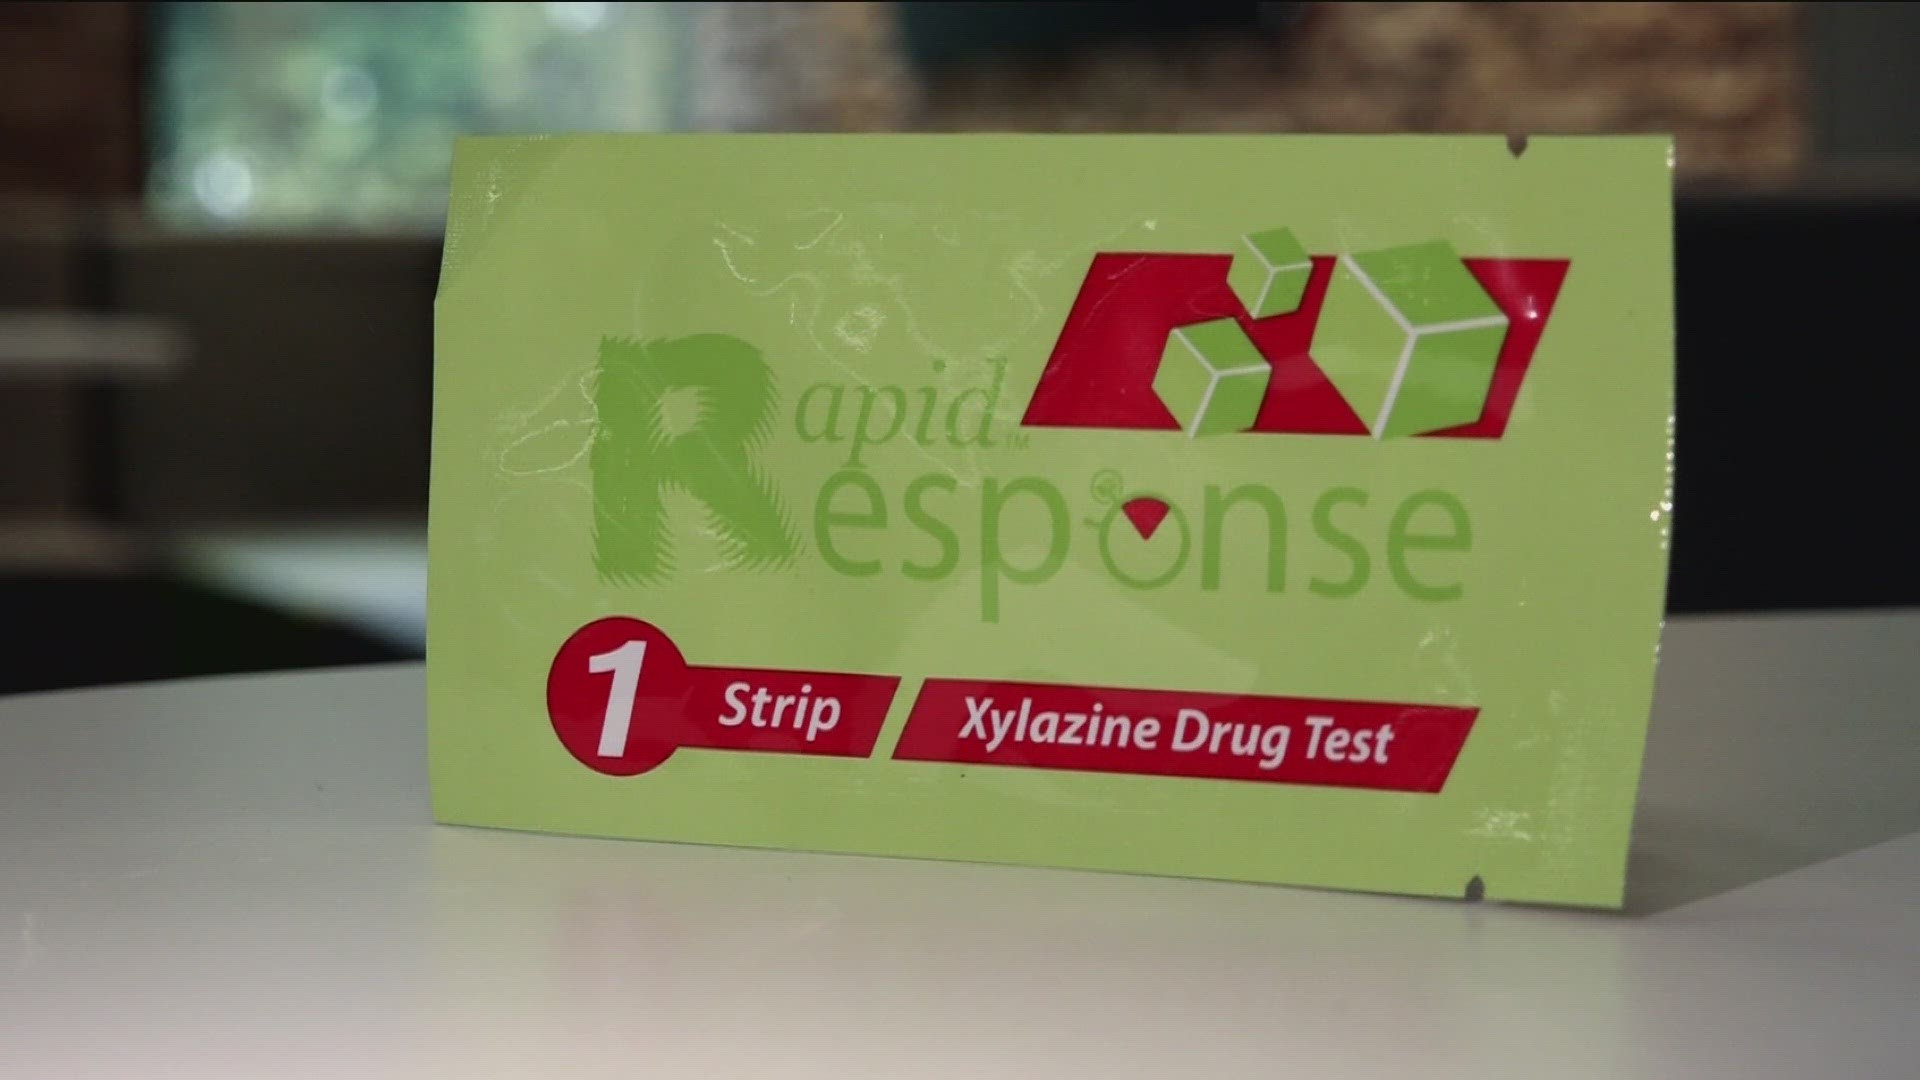 These test strips can tell people if fentanyl is laced with another drug.